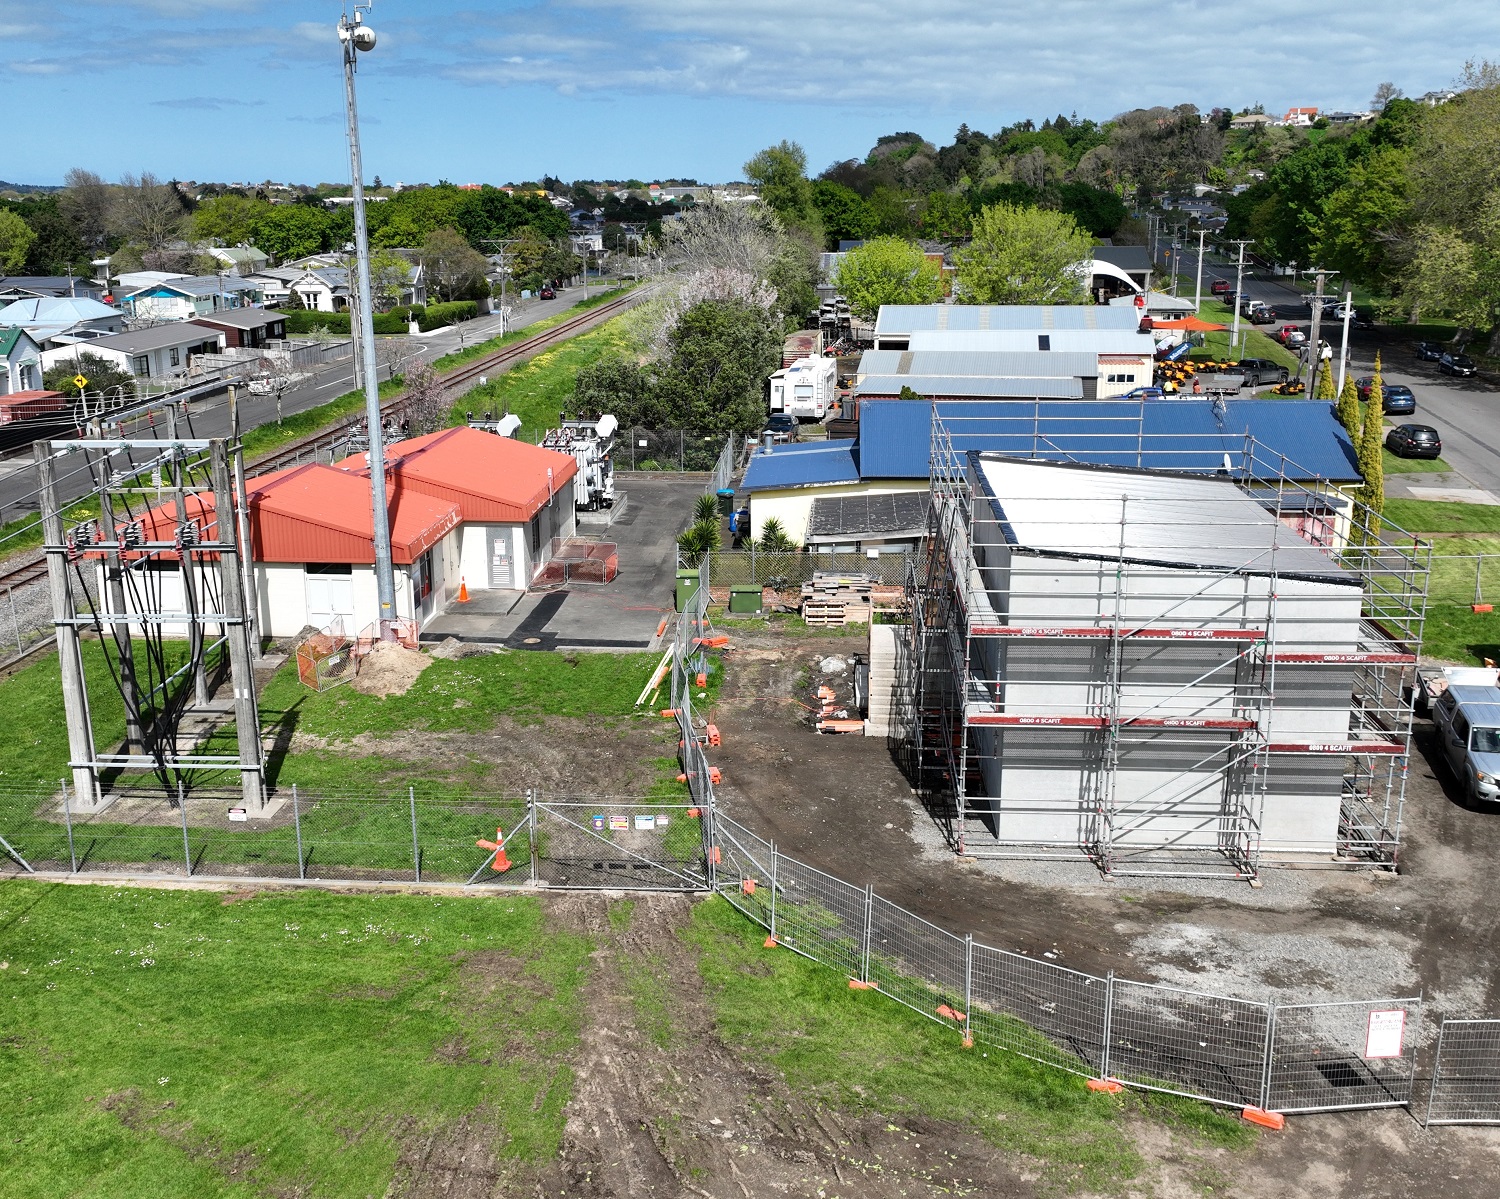 An aerial view of an electrical substation with two buildings - one is higher off the ground with scaffolding around it